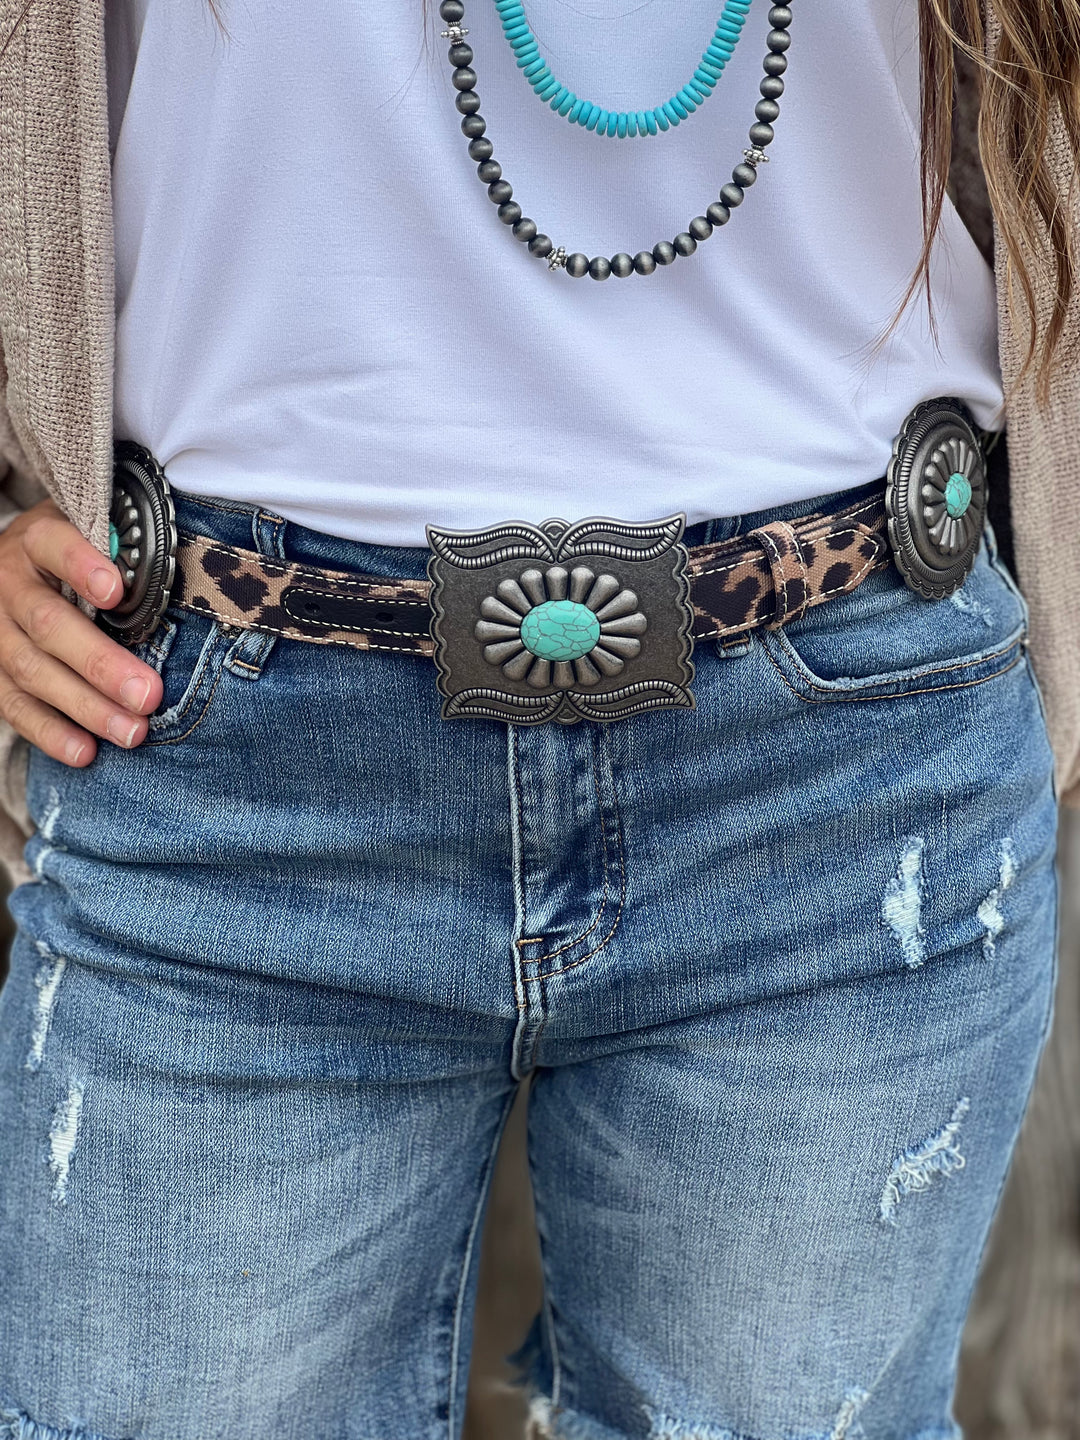 Turquoise & Leopard Oval Concho Belt by Ariat